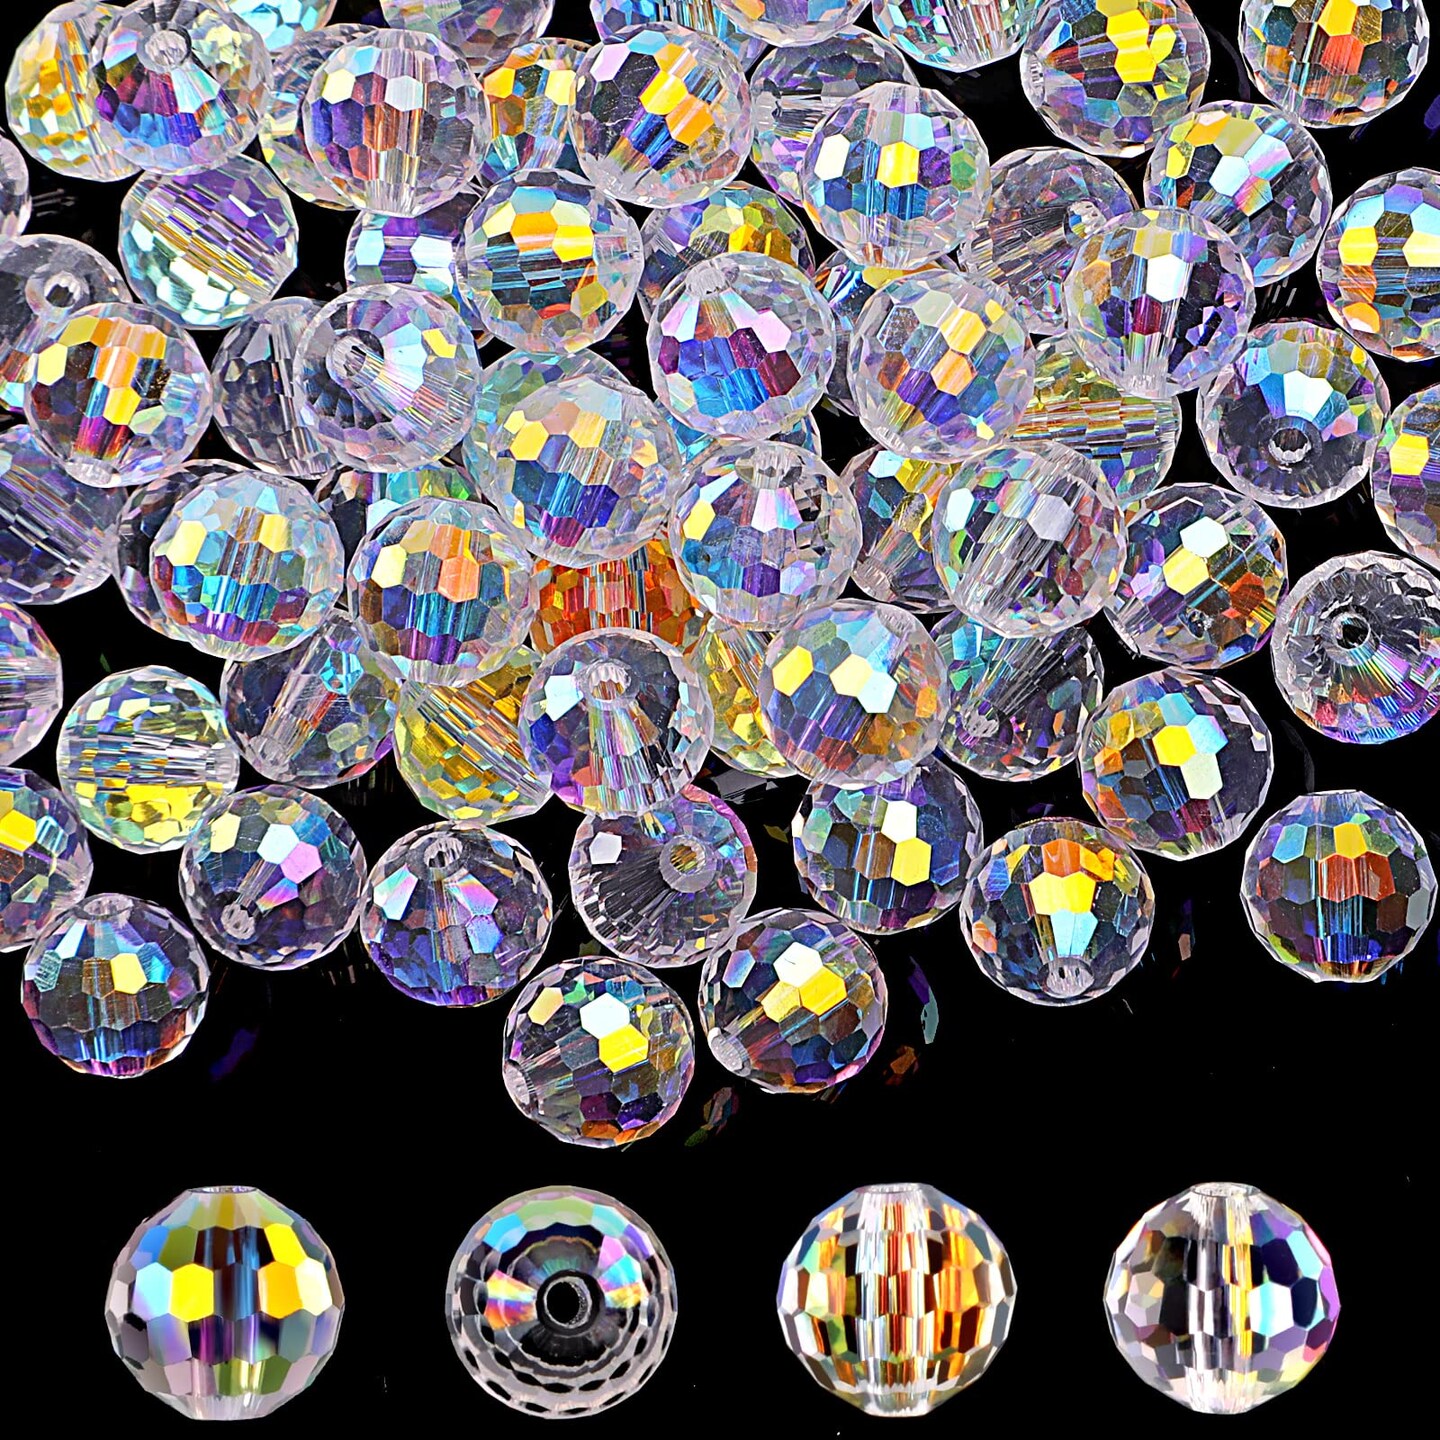 Crystal Glass Beads for Jewelry Making, 80 Pieces Crystal Beads, 10mm Glass Beads, Round Faceted Beads Bulk for Craft Necklace Bracelet Earring (AB Color)